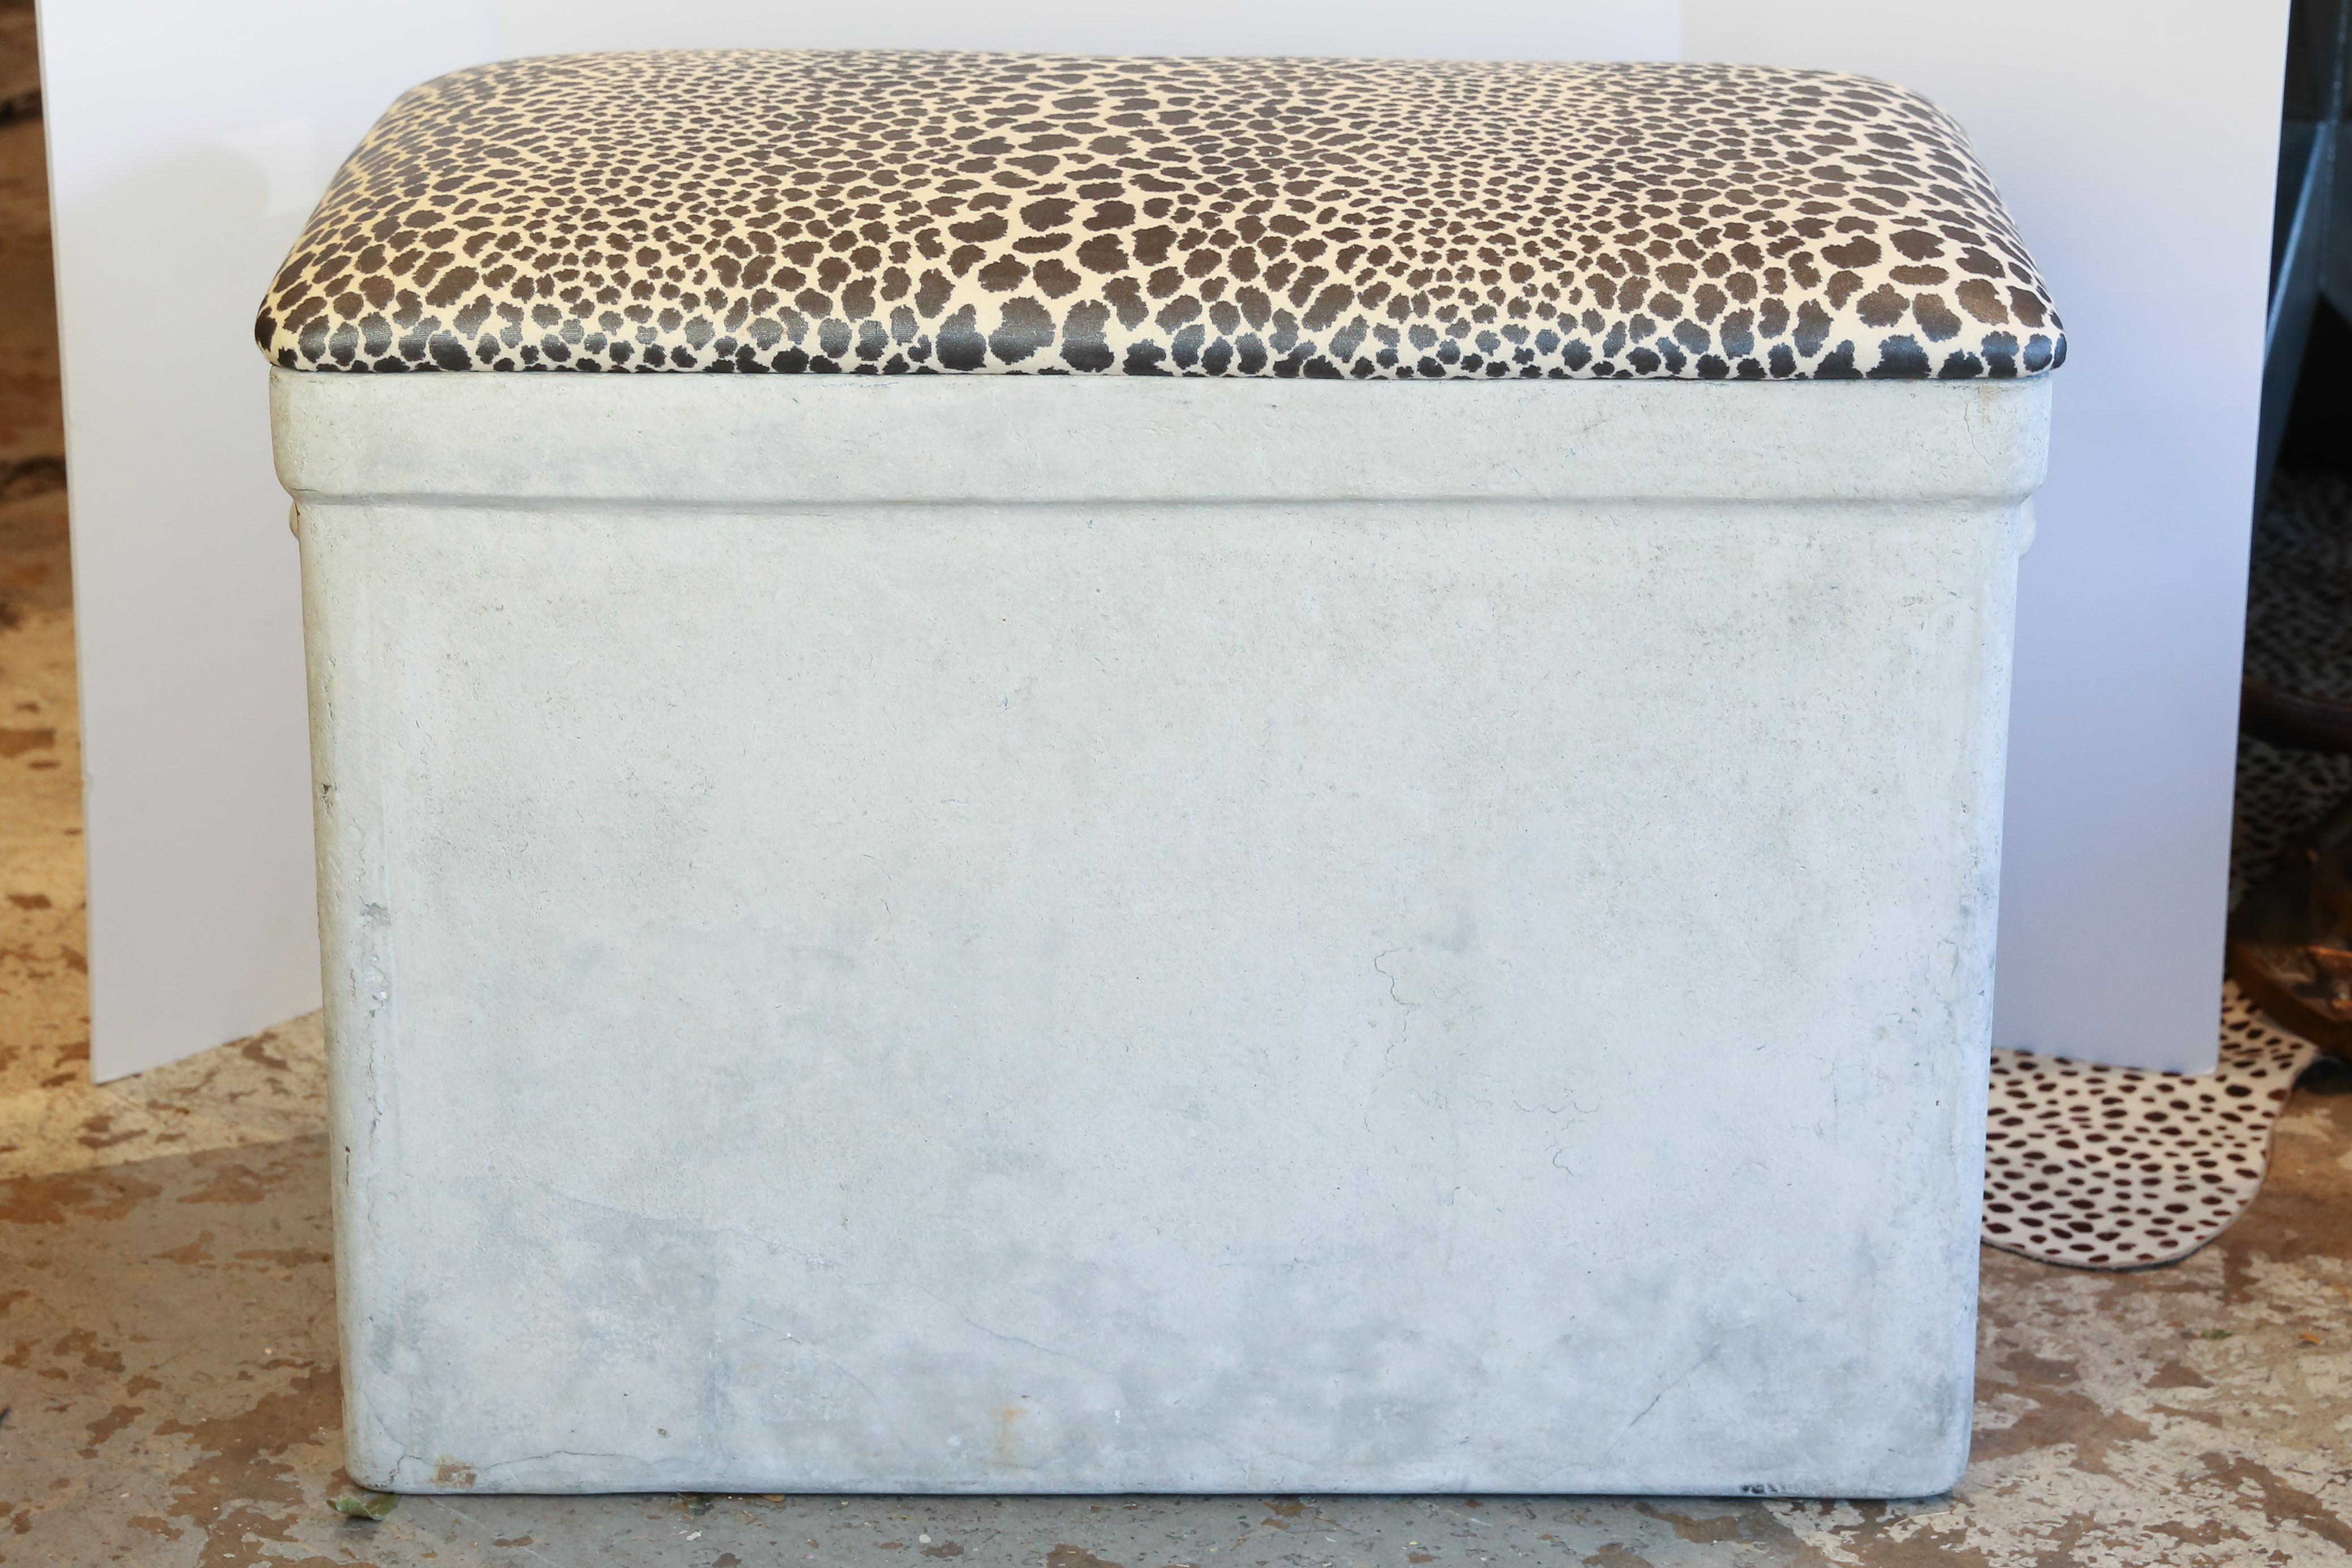 We took this fabulous Willy Guhl box planter and converted it into an even more fabulous bench. With a solid wood top, upholstered in waxed cotton fabric featuring a cheetah print, this piece can easily add a dash of chic storage to any space and